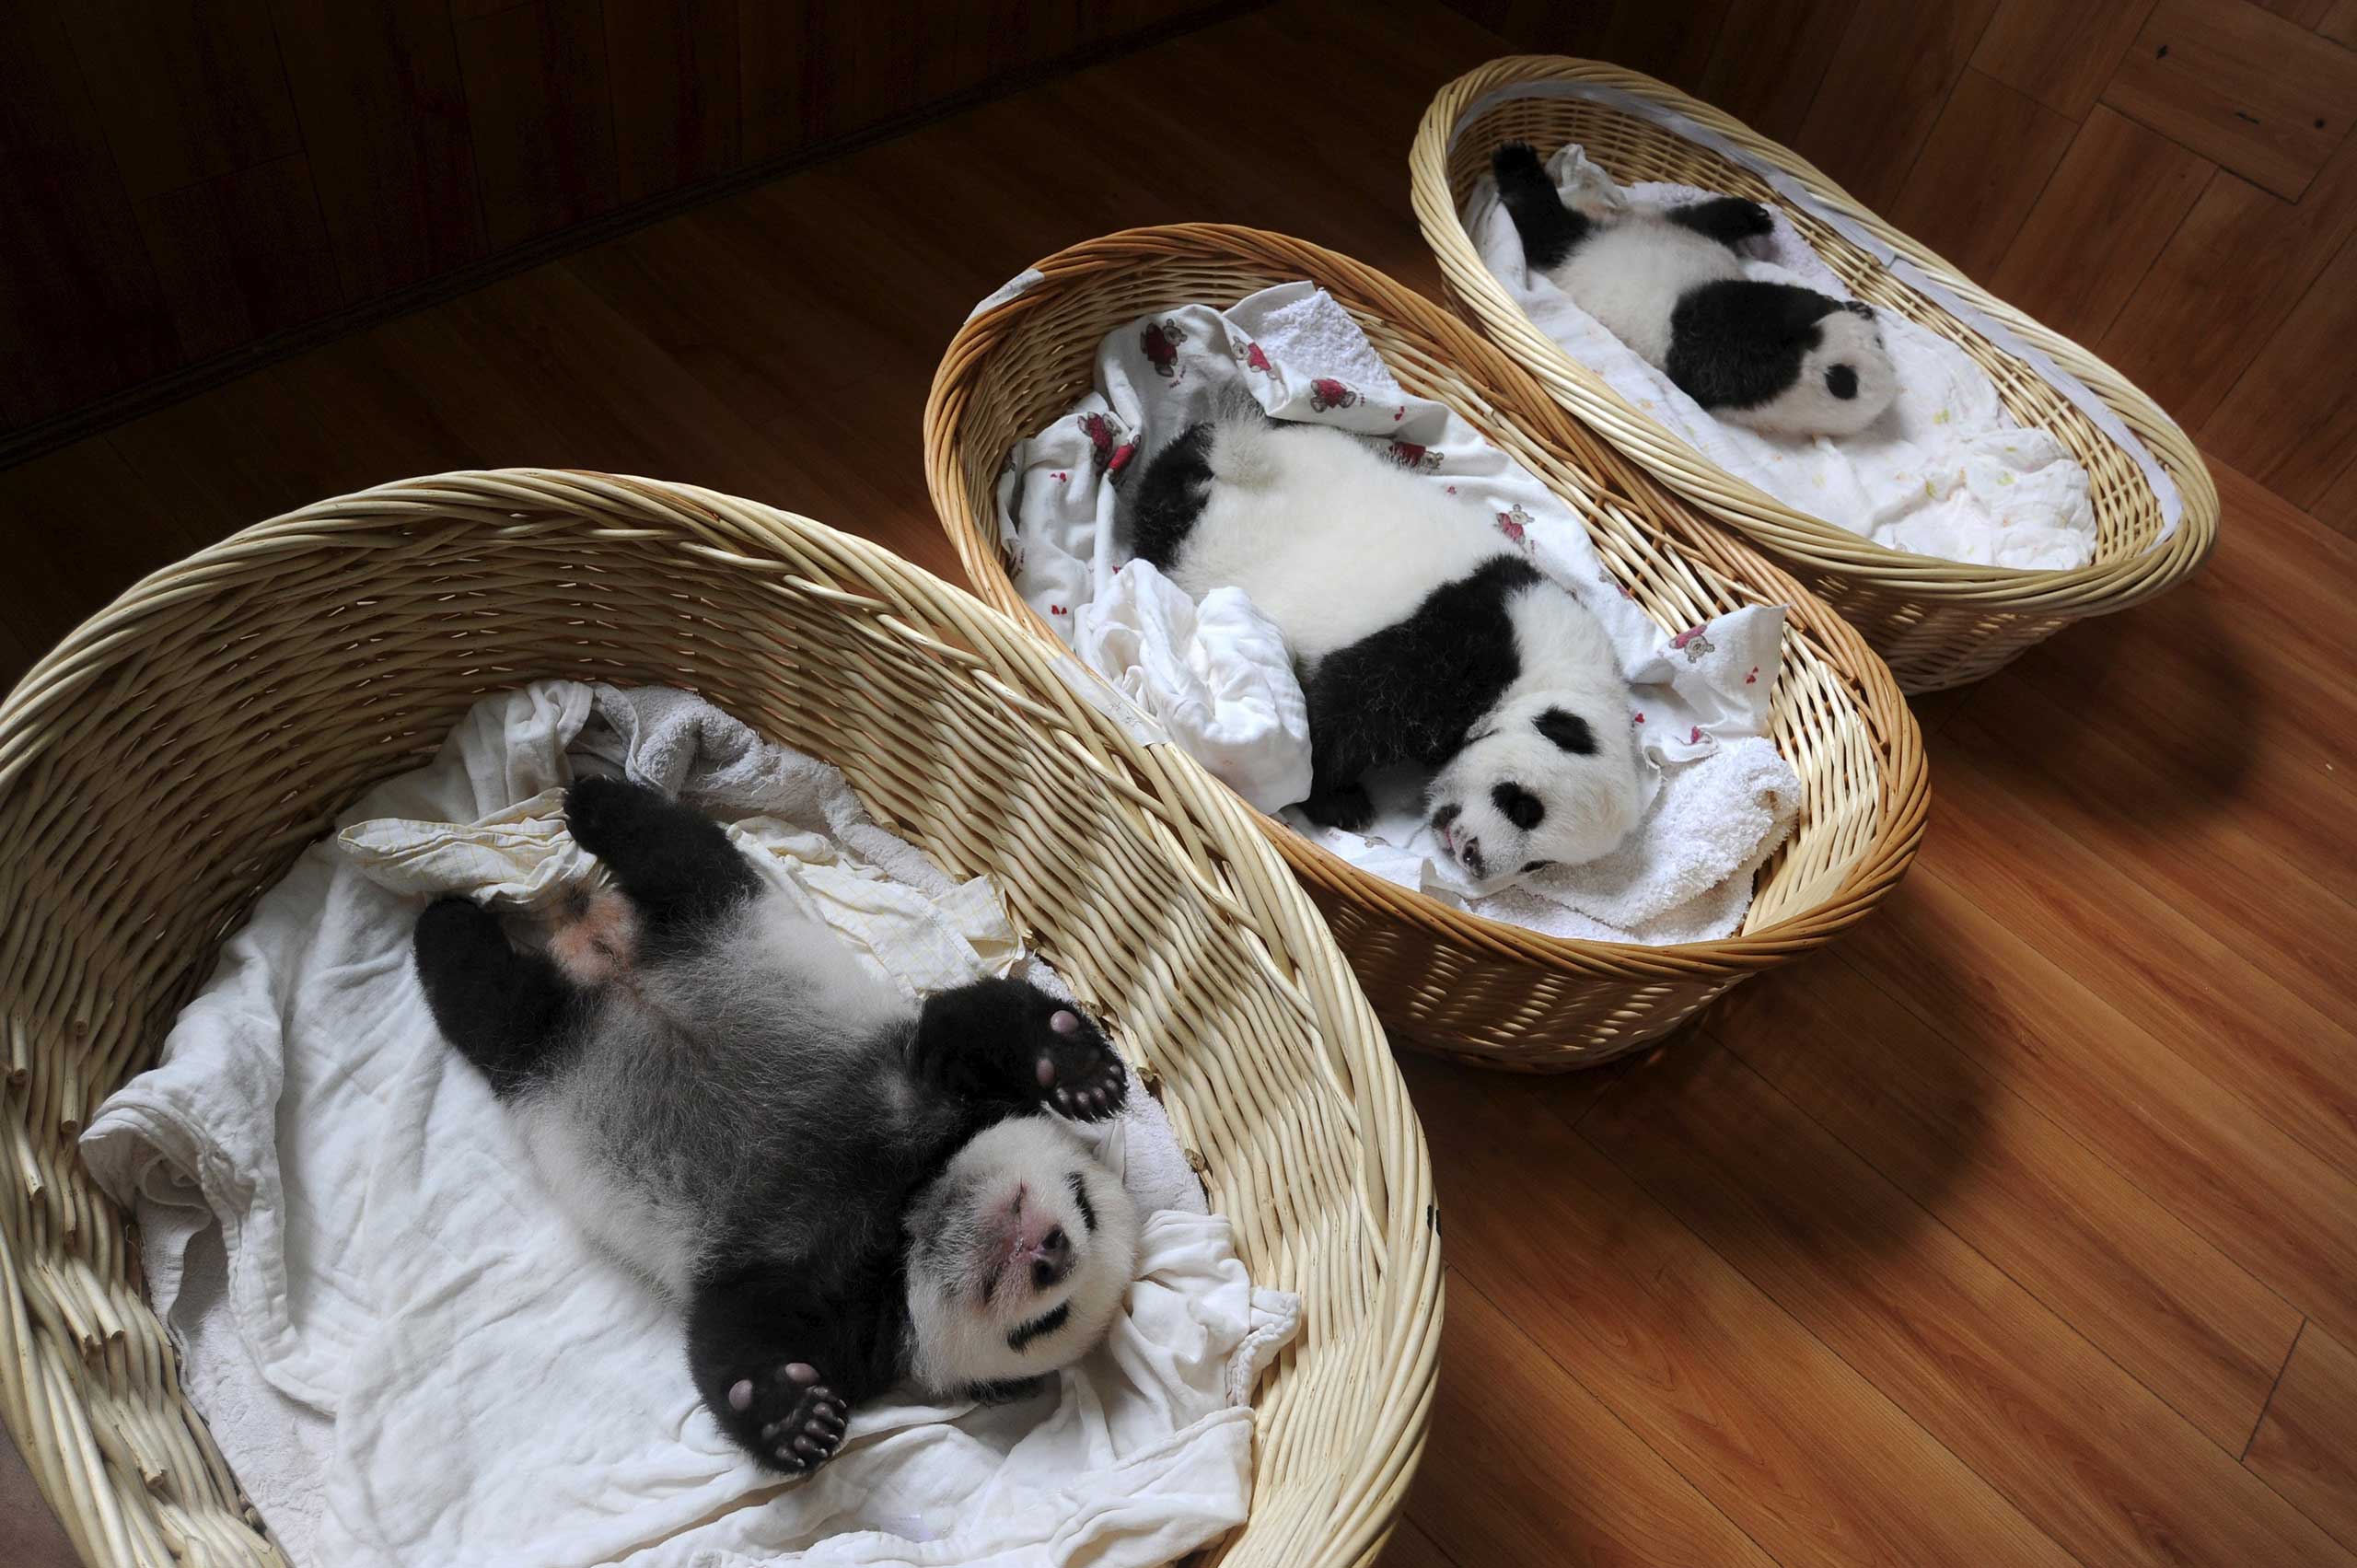 Giant panda cubs are seen inside baskets during their debut appearance to visitors at a giant panda breeding centre in Ya'an